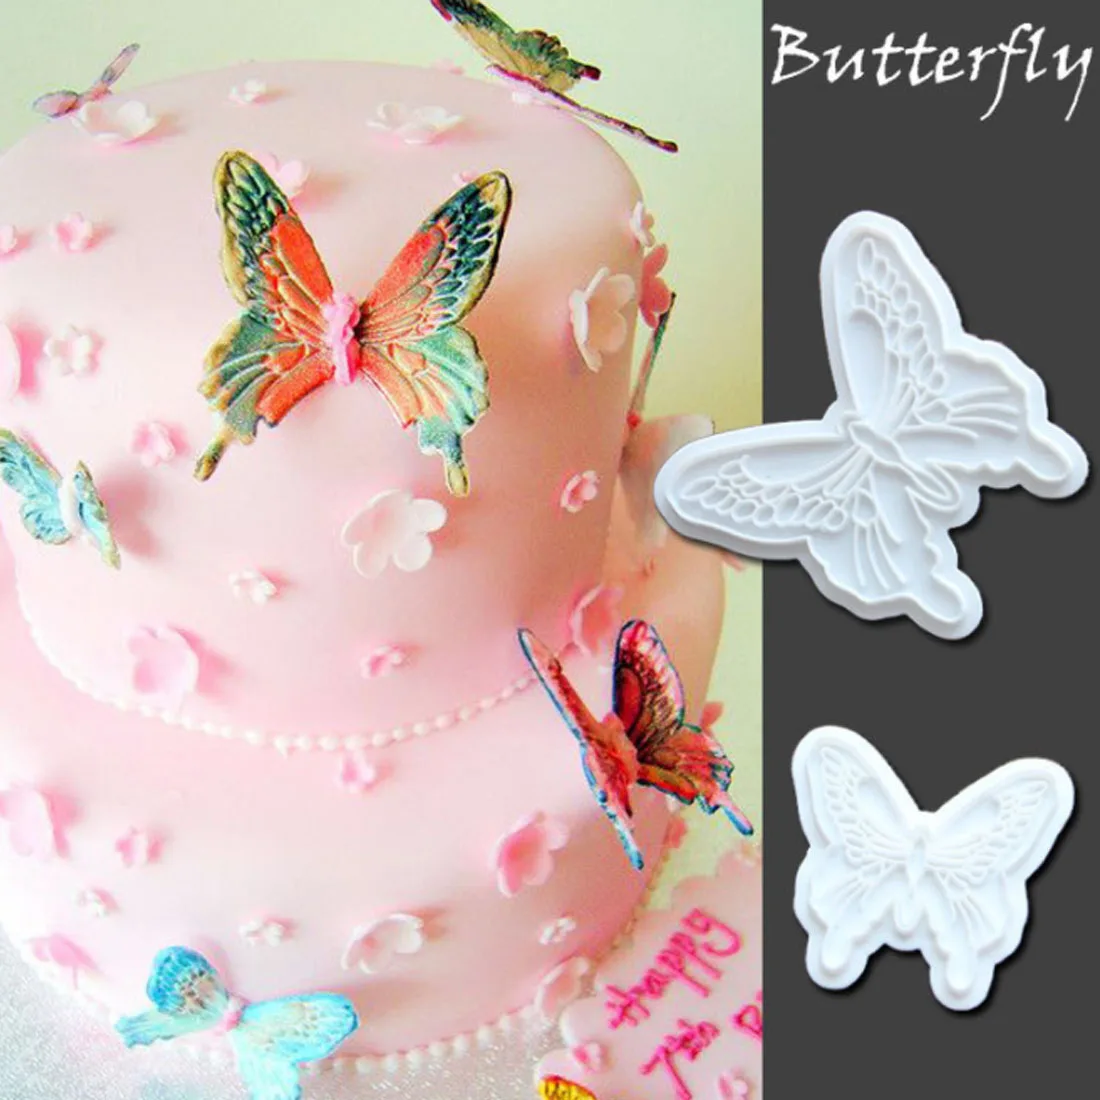 2x/Set Butterfly Cake Fondant Sugarcraft Mould Cookie Plunger Cutter Mold ToMJH2 